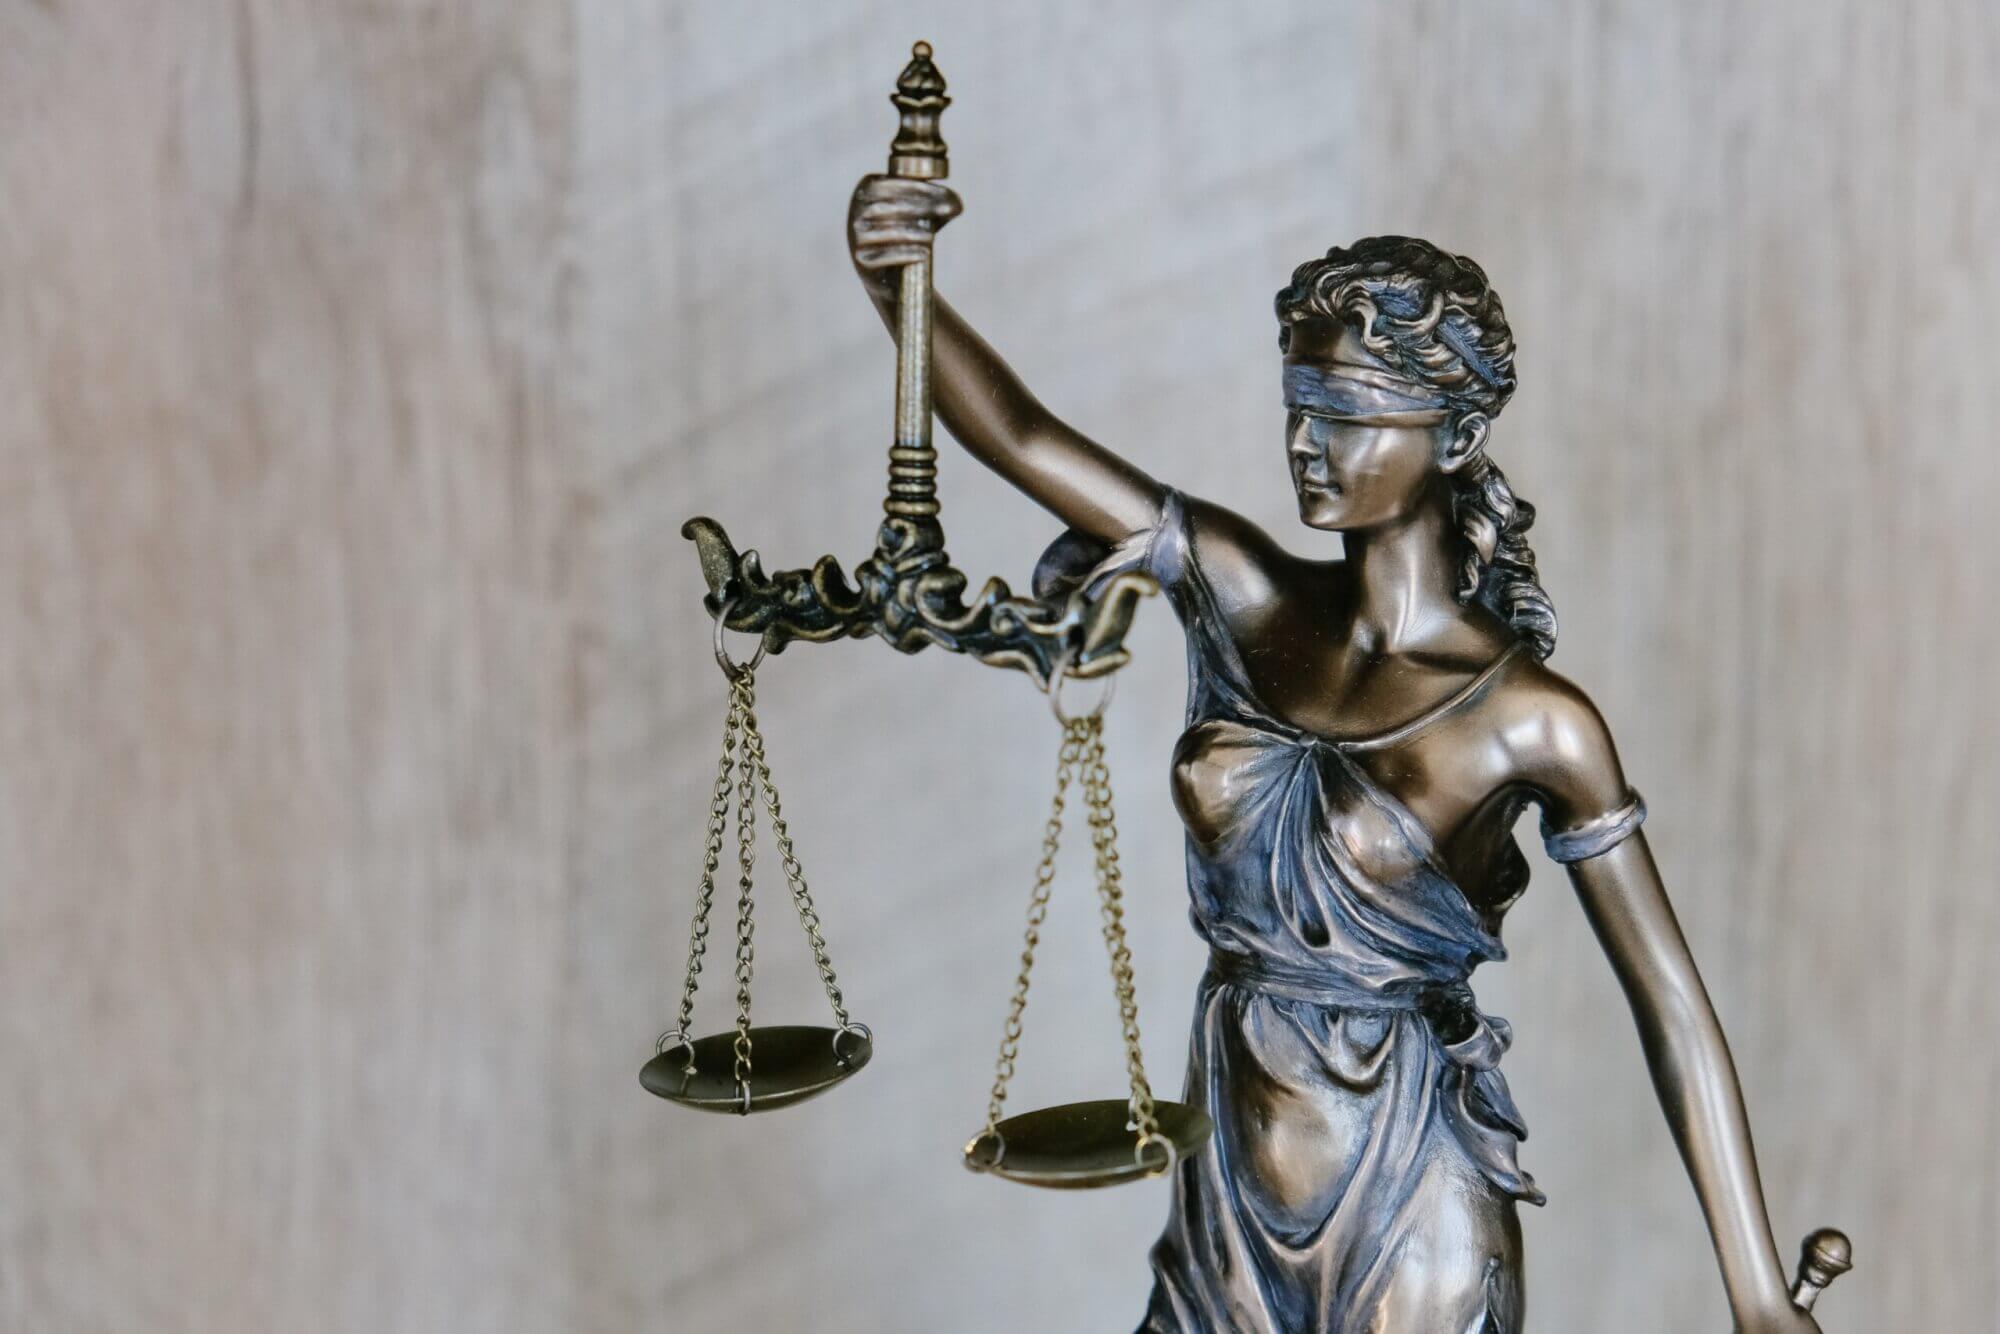 Image from Unsplash of the scales of justice